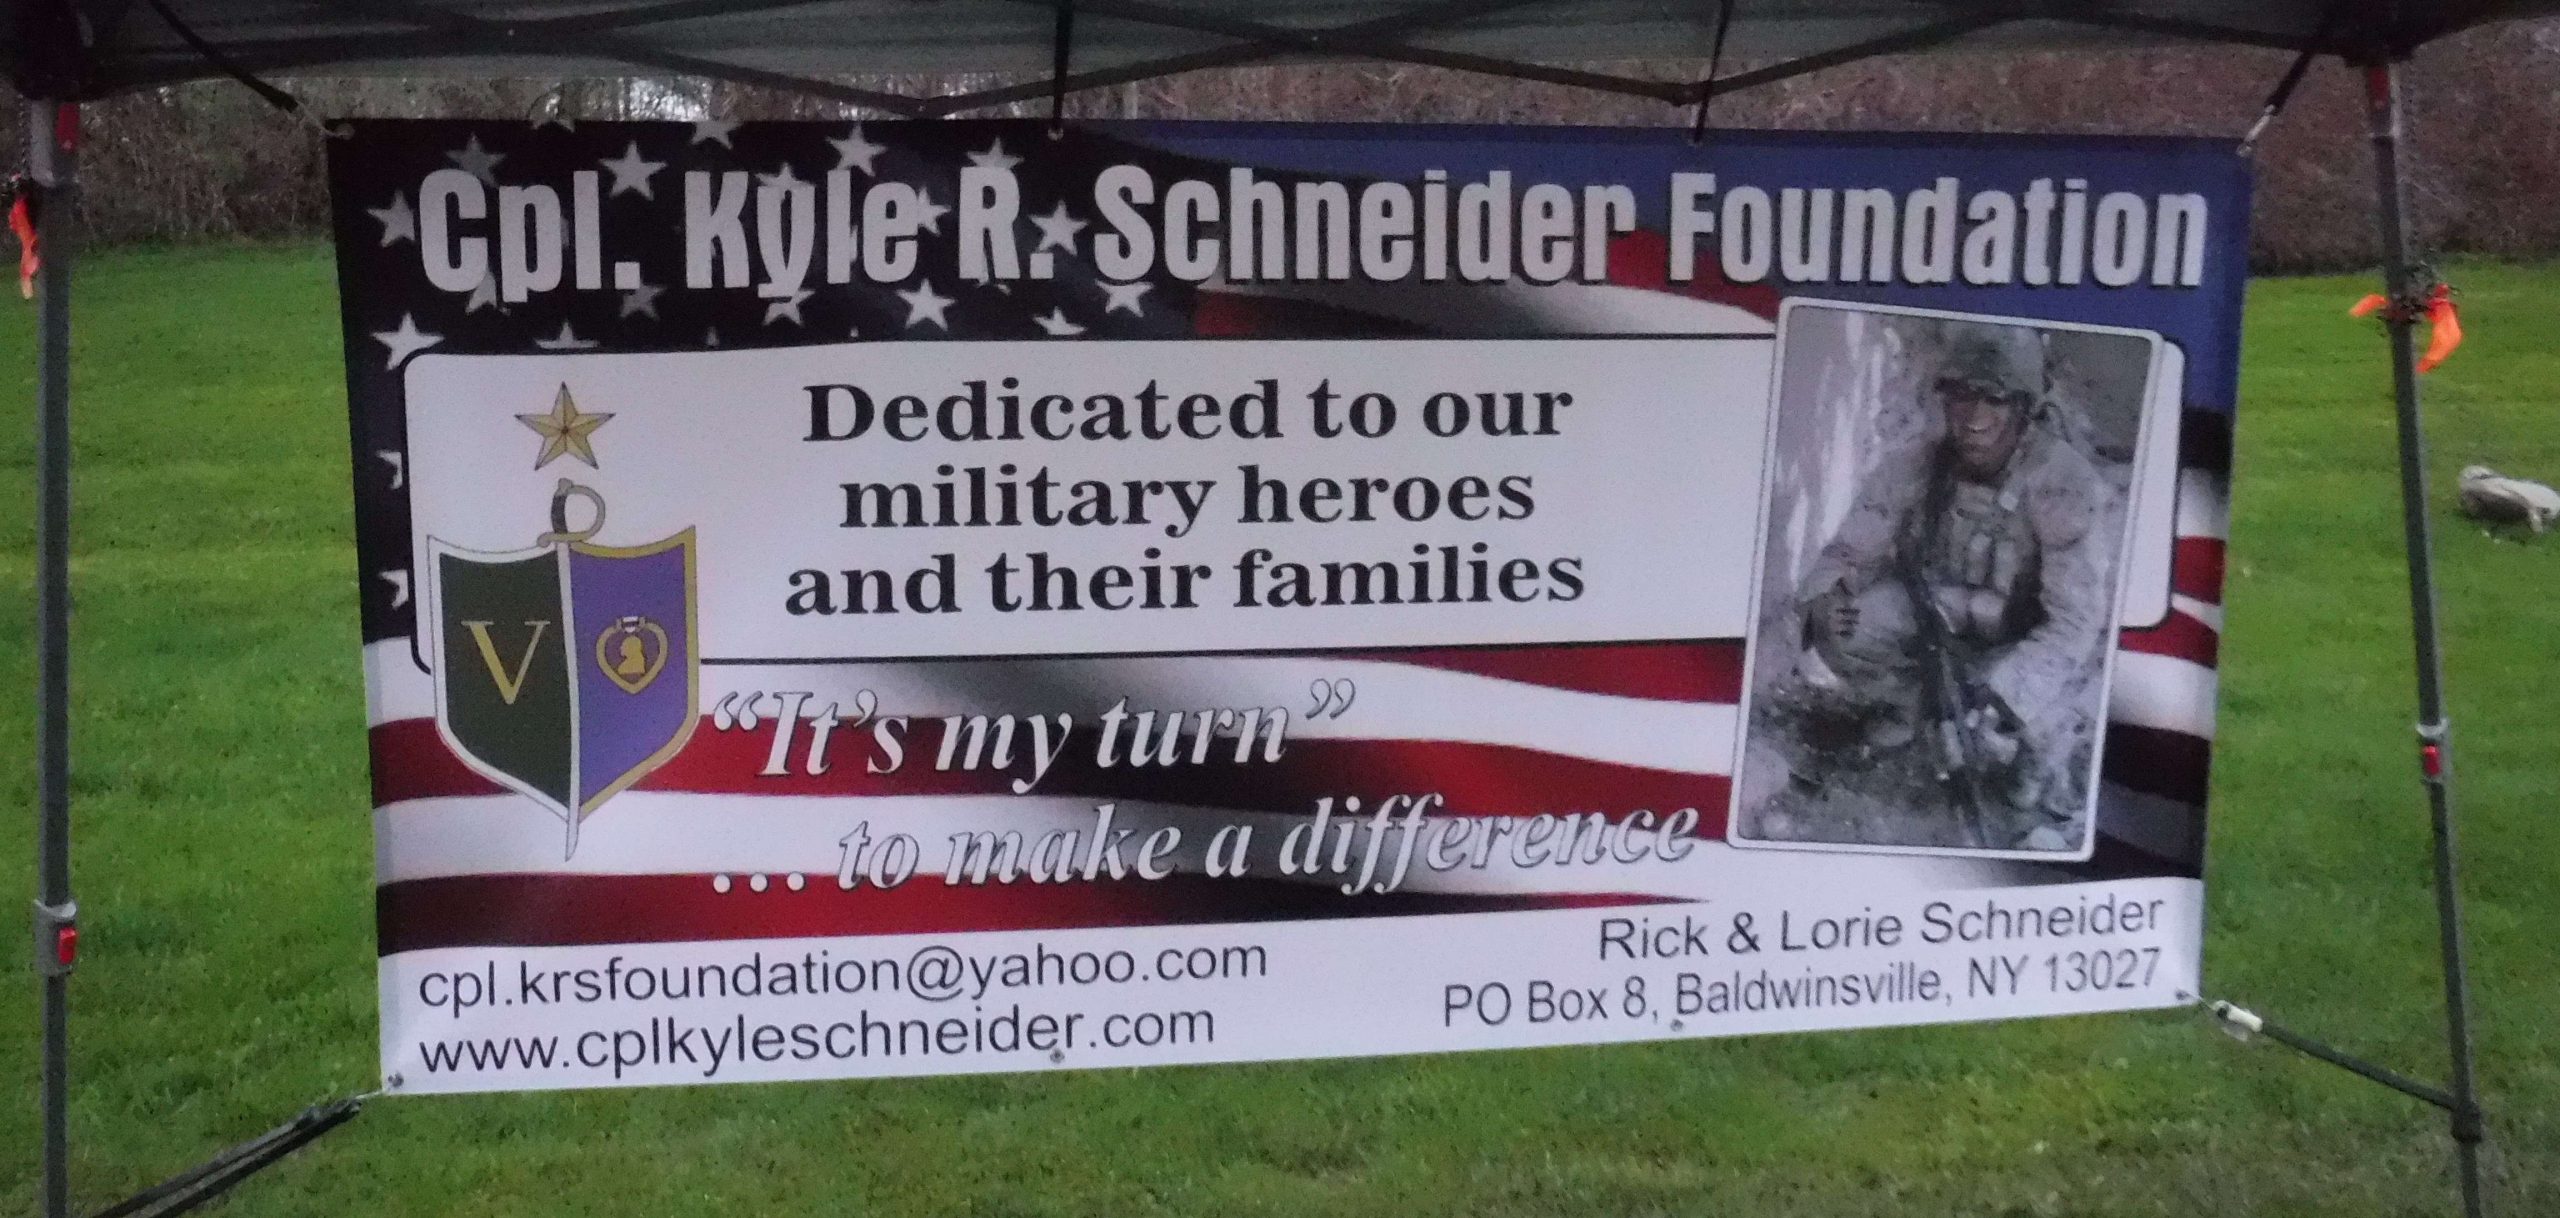 The Cpl. Kyle Schneider Foundation played a major part in this gathering.  